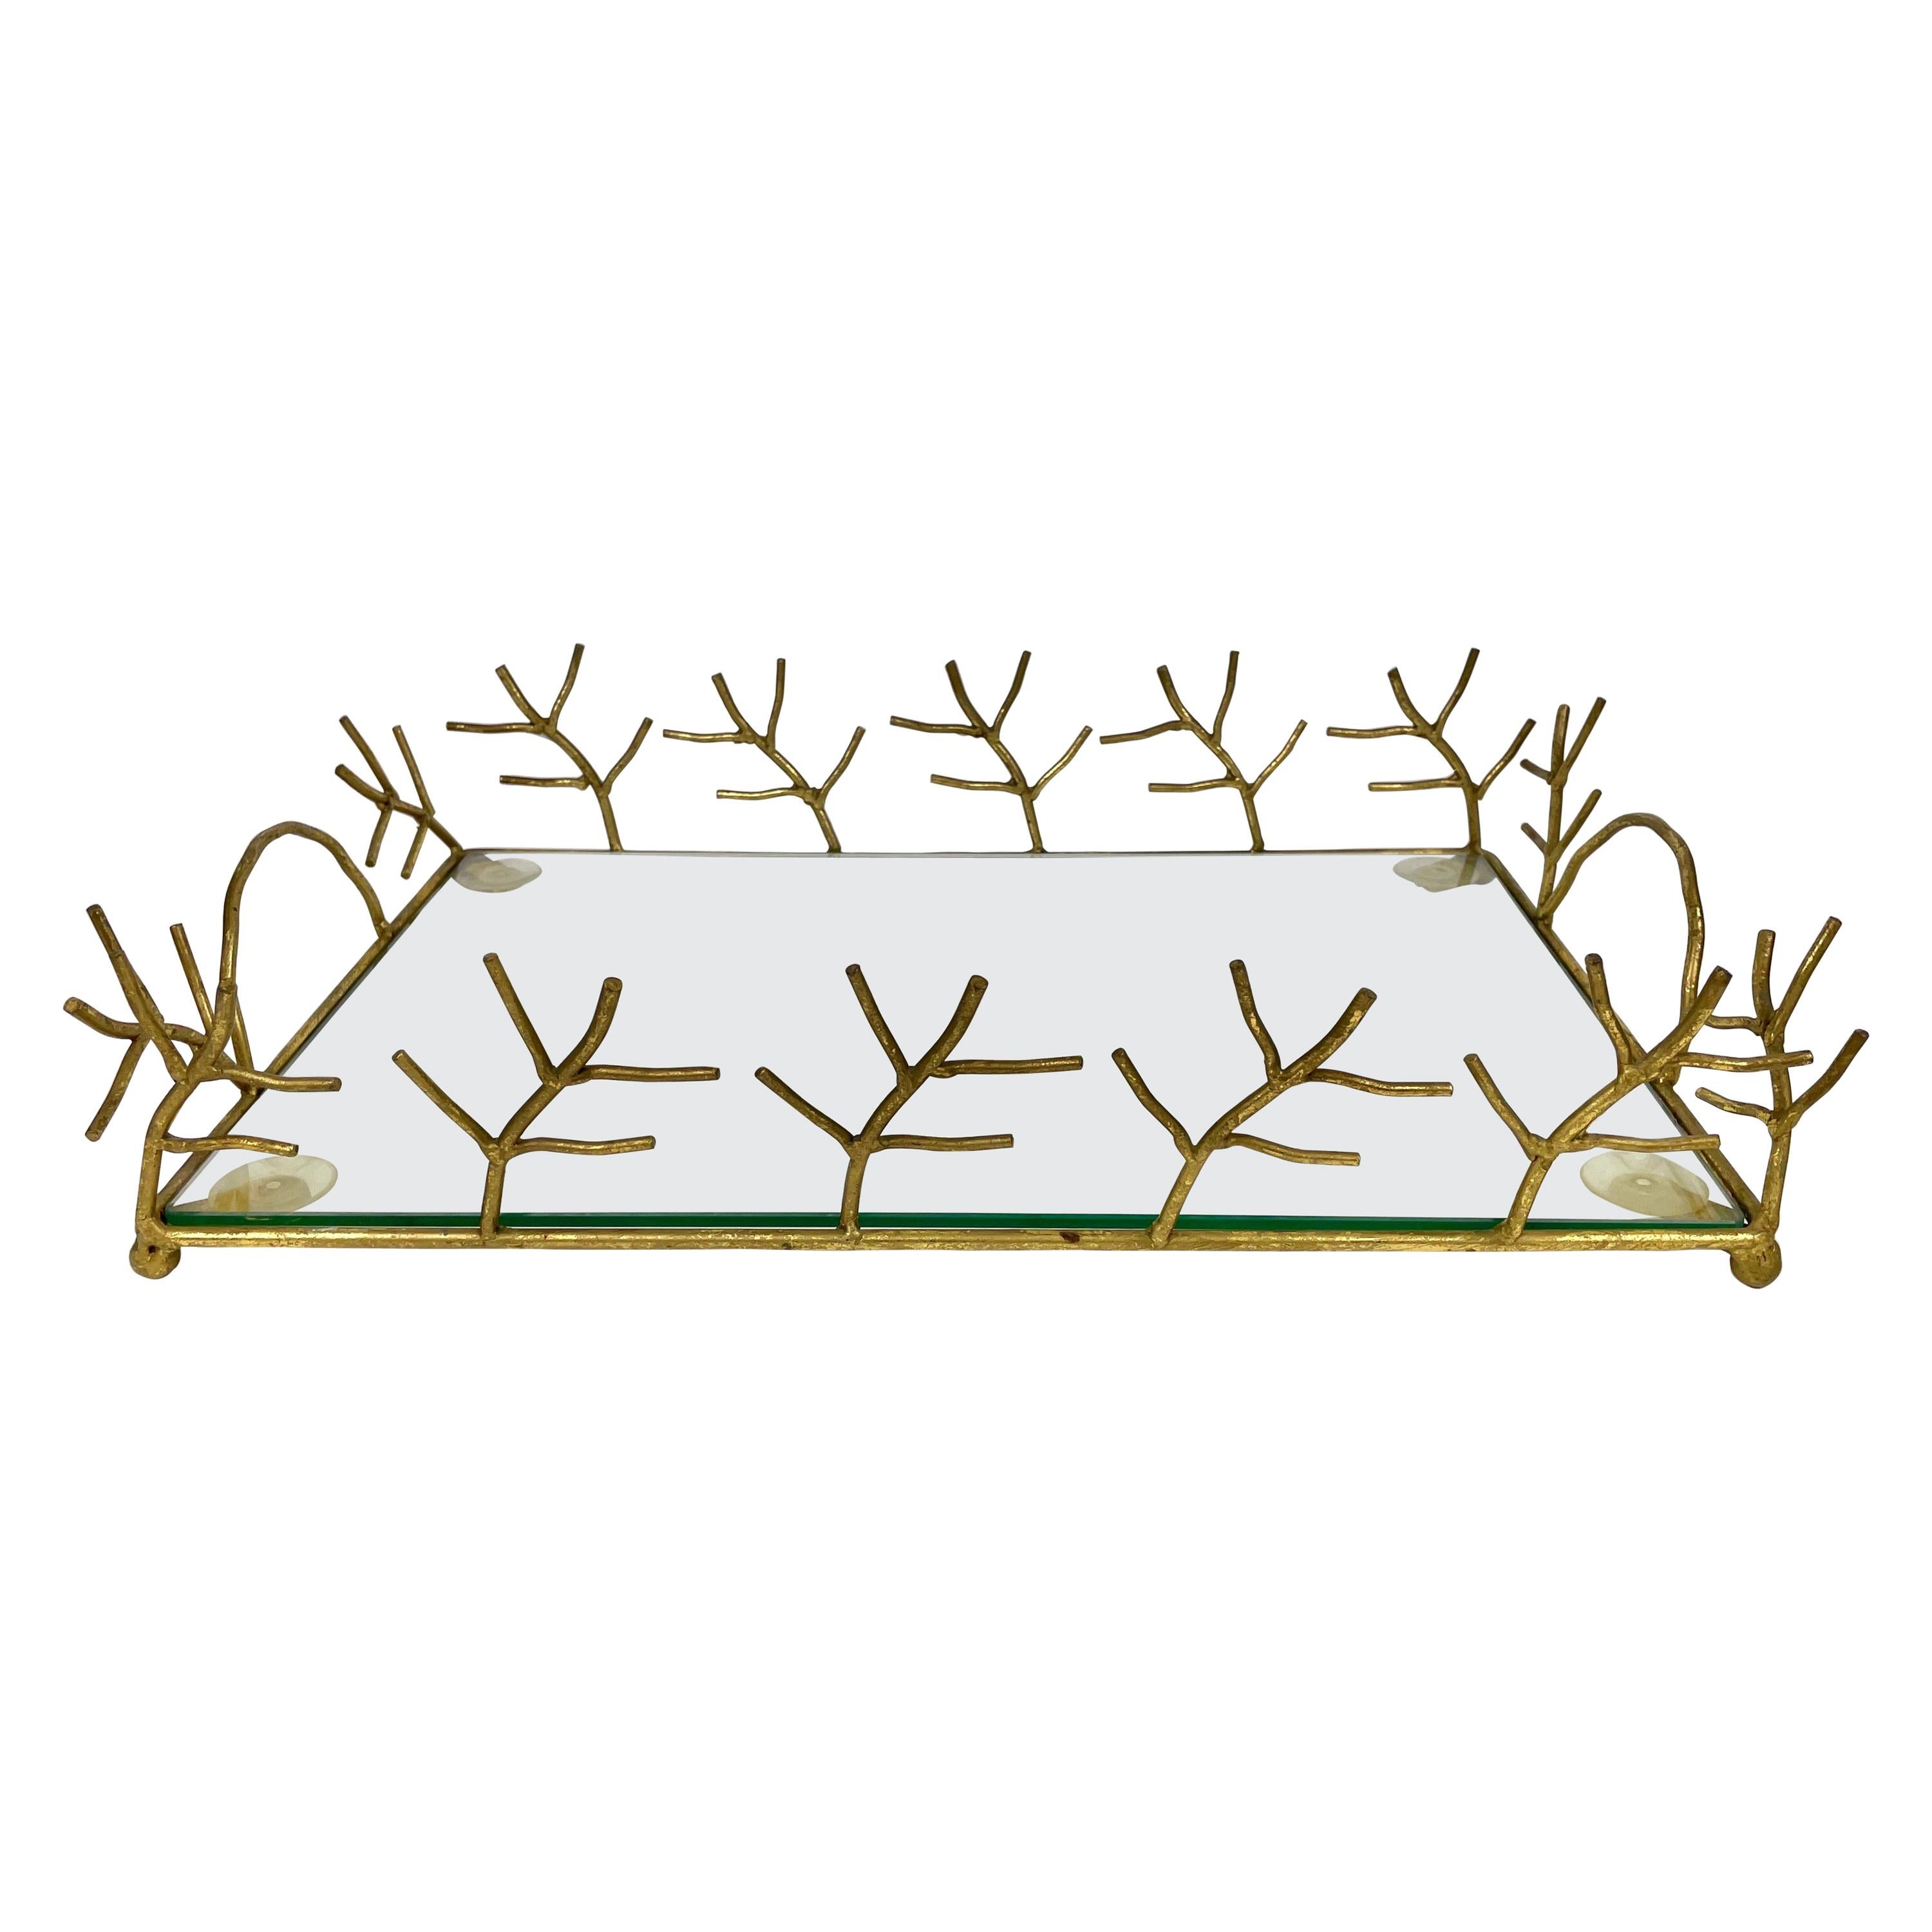 Serving Tray in Glass and Golden Metal Branches Maison Baguès Style France 1970s For Sale